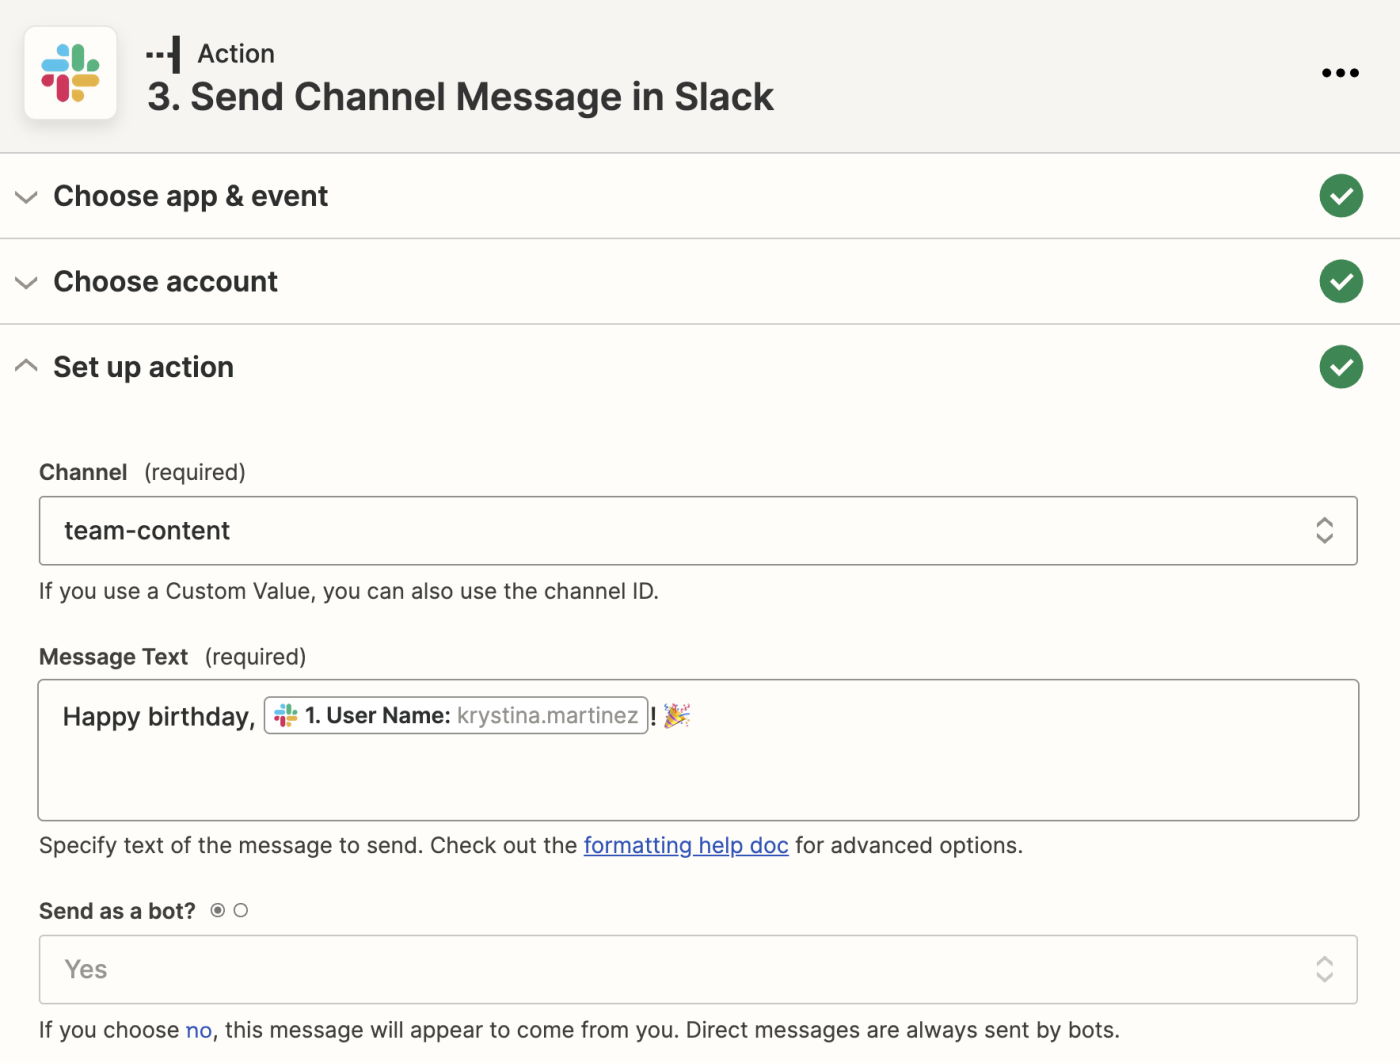 customized message in Slack